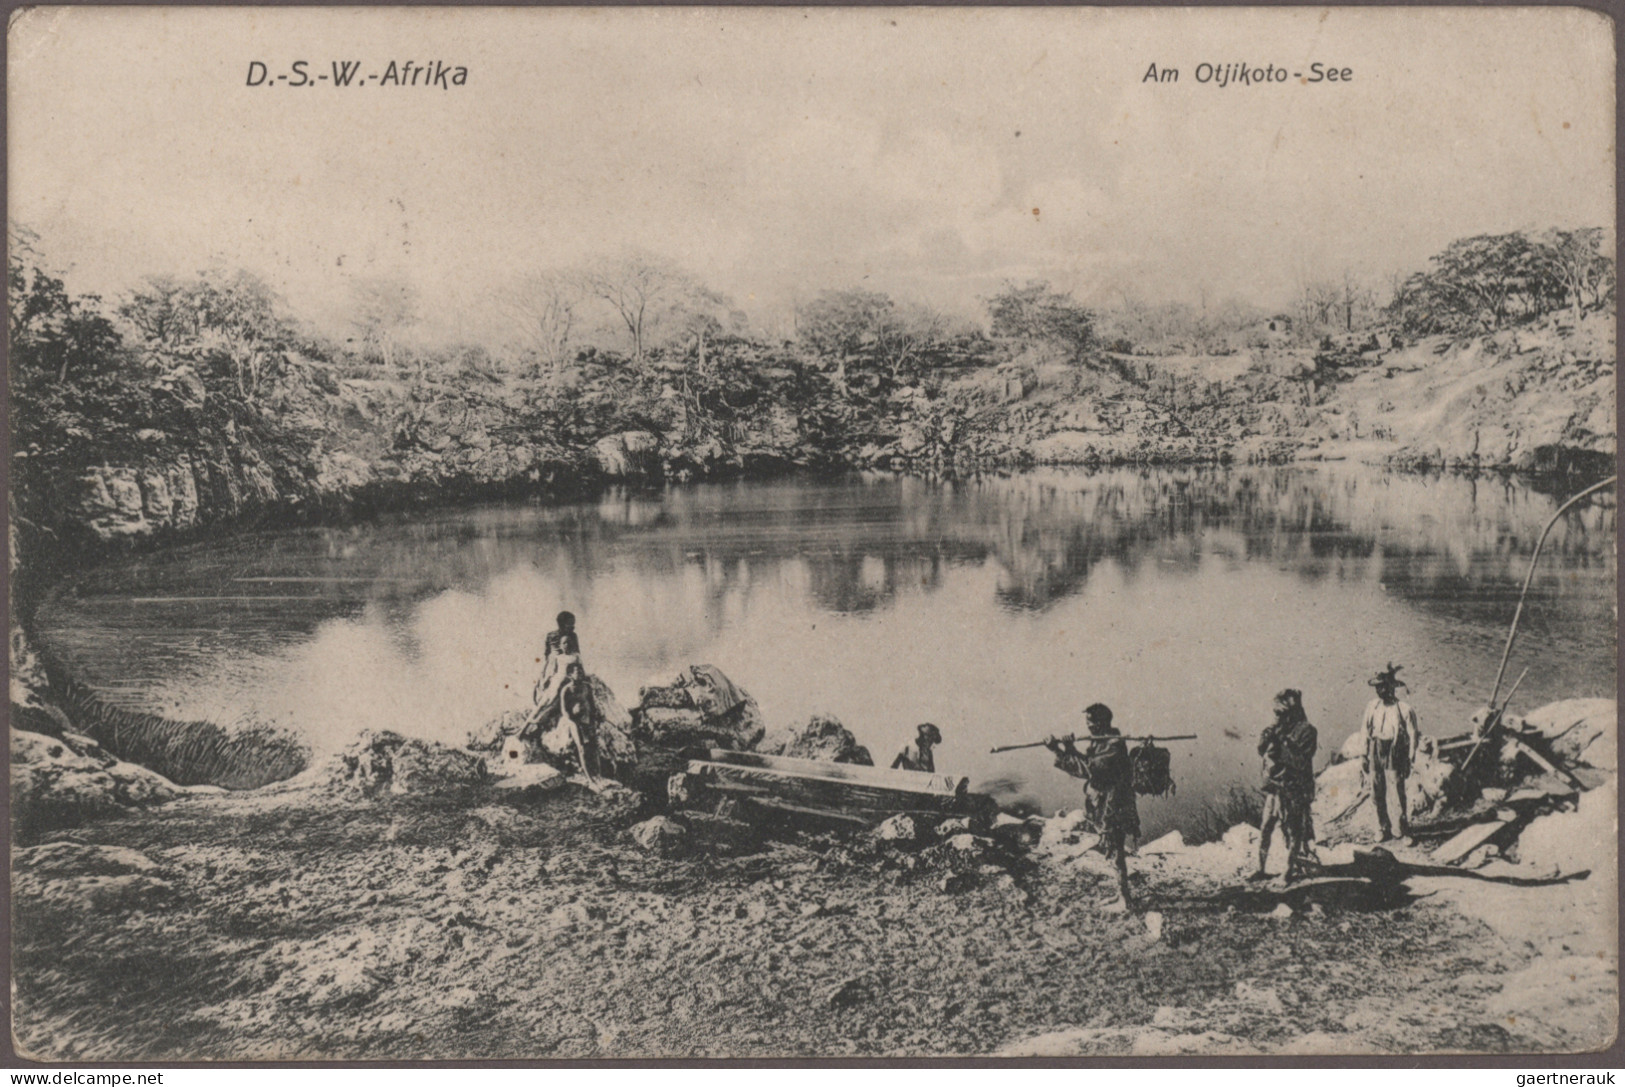 Deutsch-Südwestafrika - Stempel: 1915 South African Field Post In SWA: Four Diff - Sud-Ouest Africain Allemand